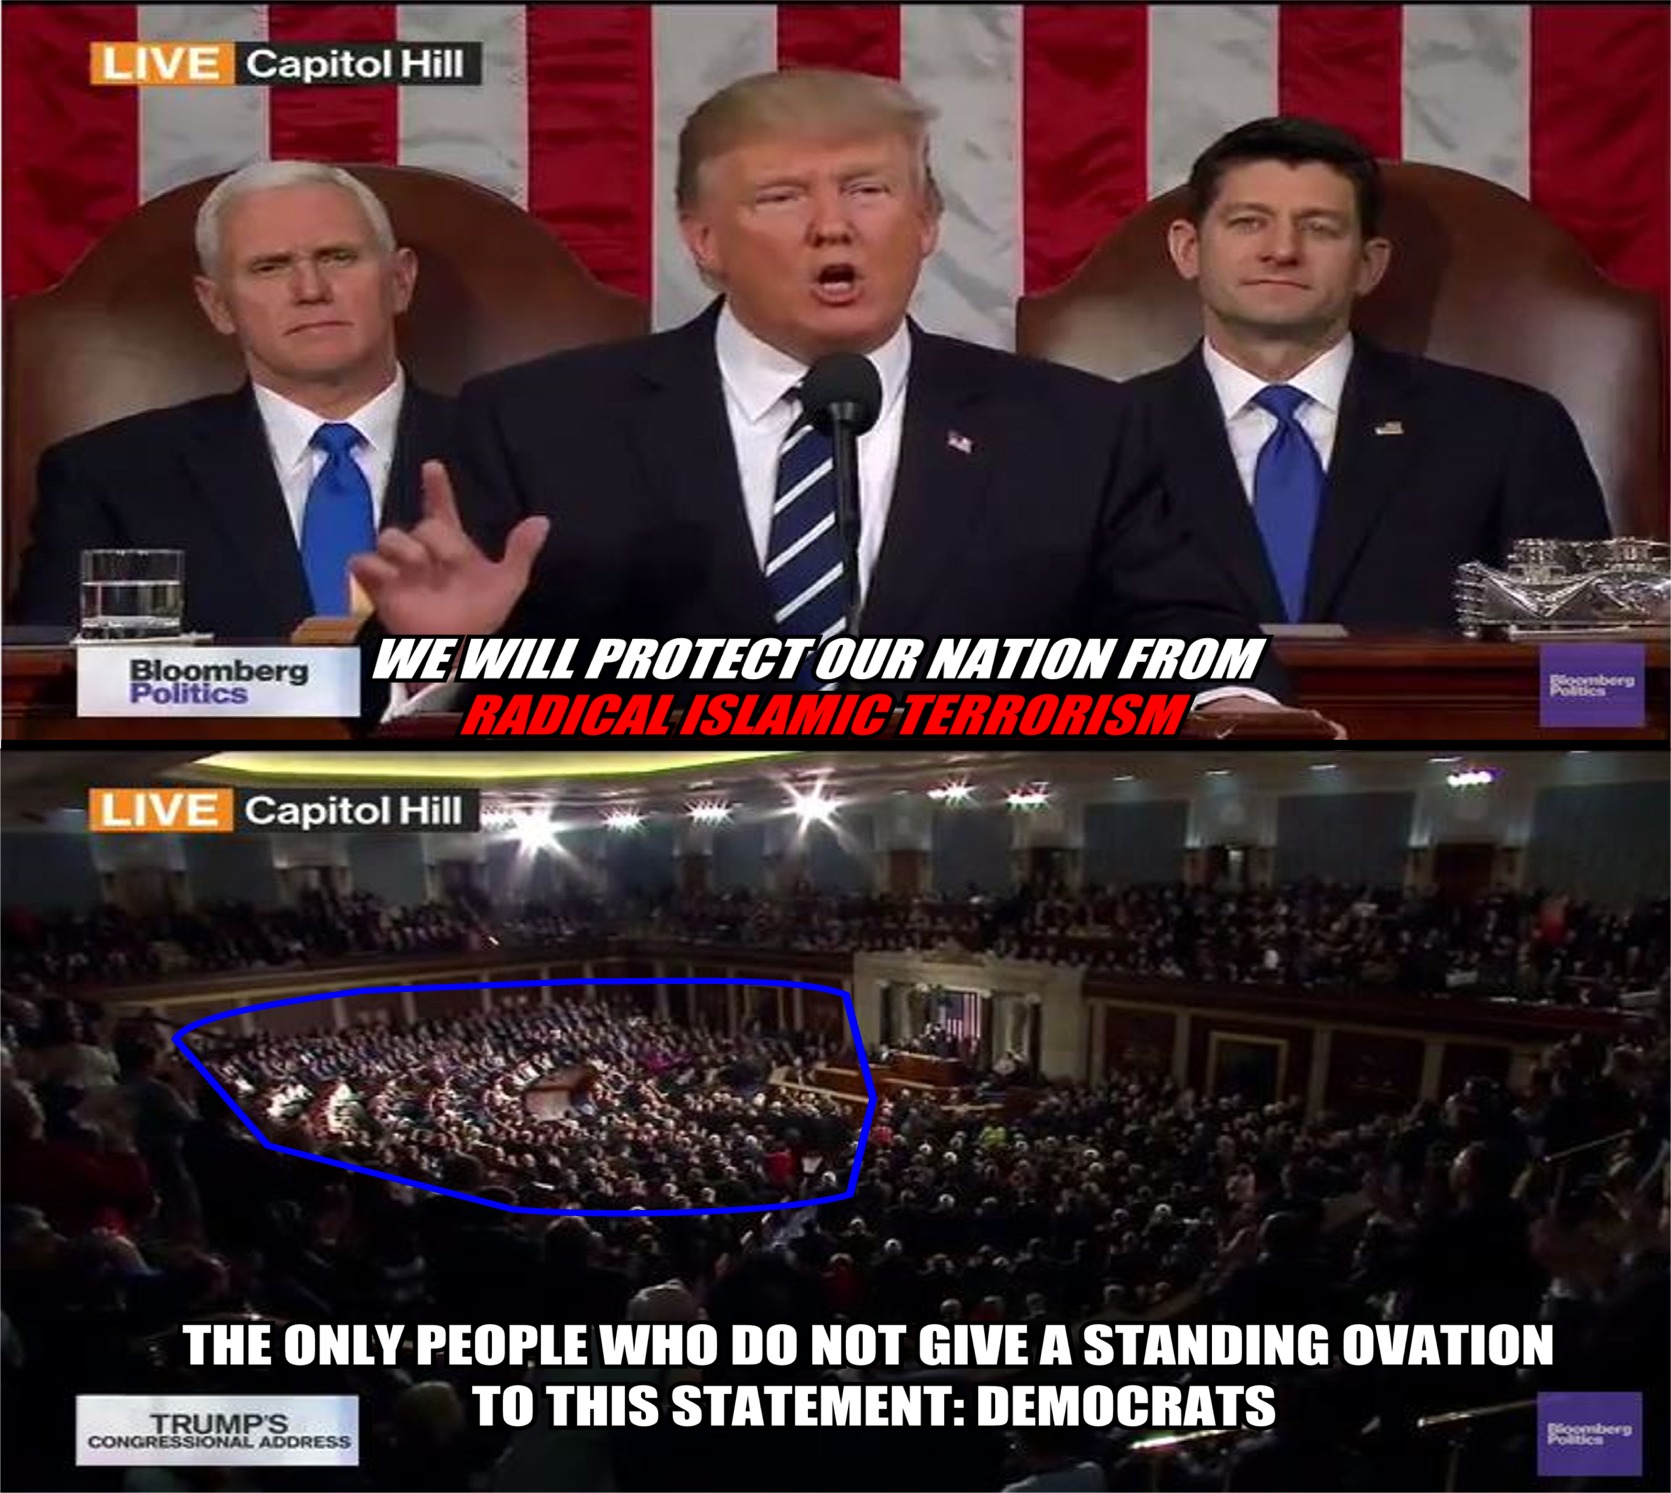 *Democrats don't stand or applaud